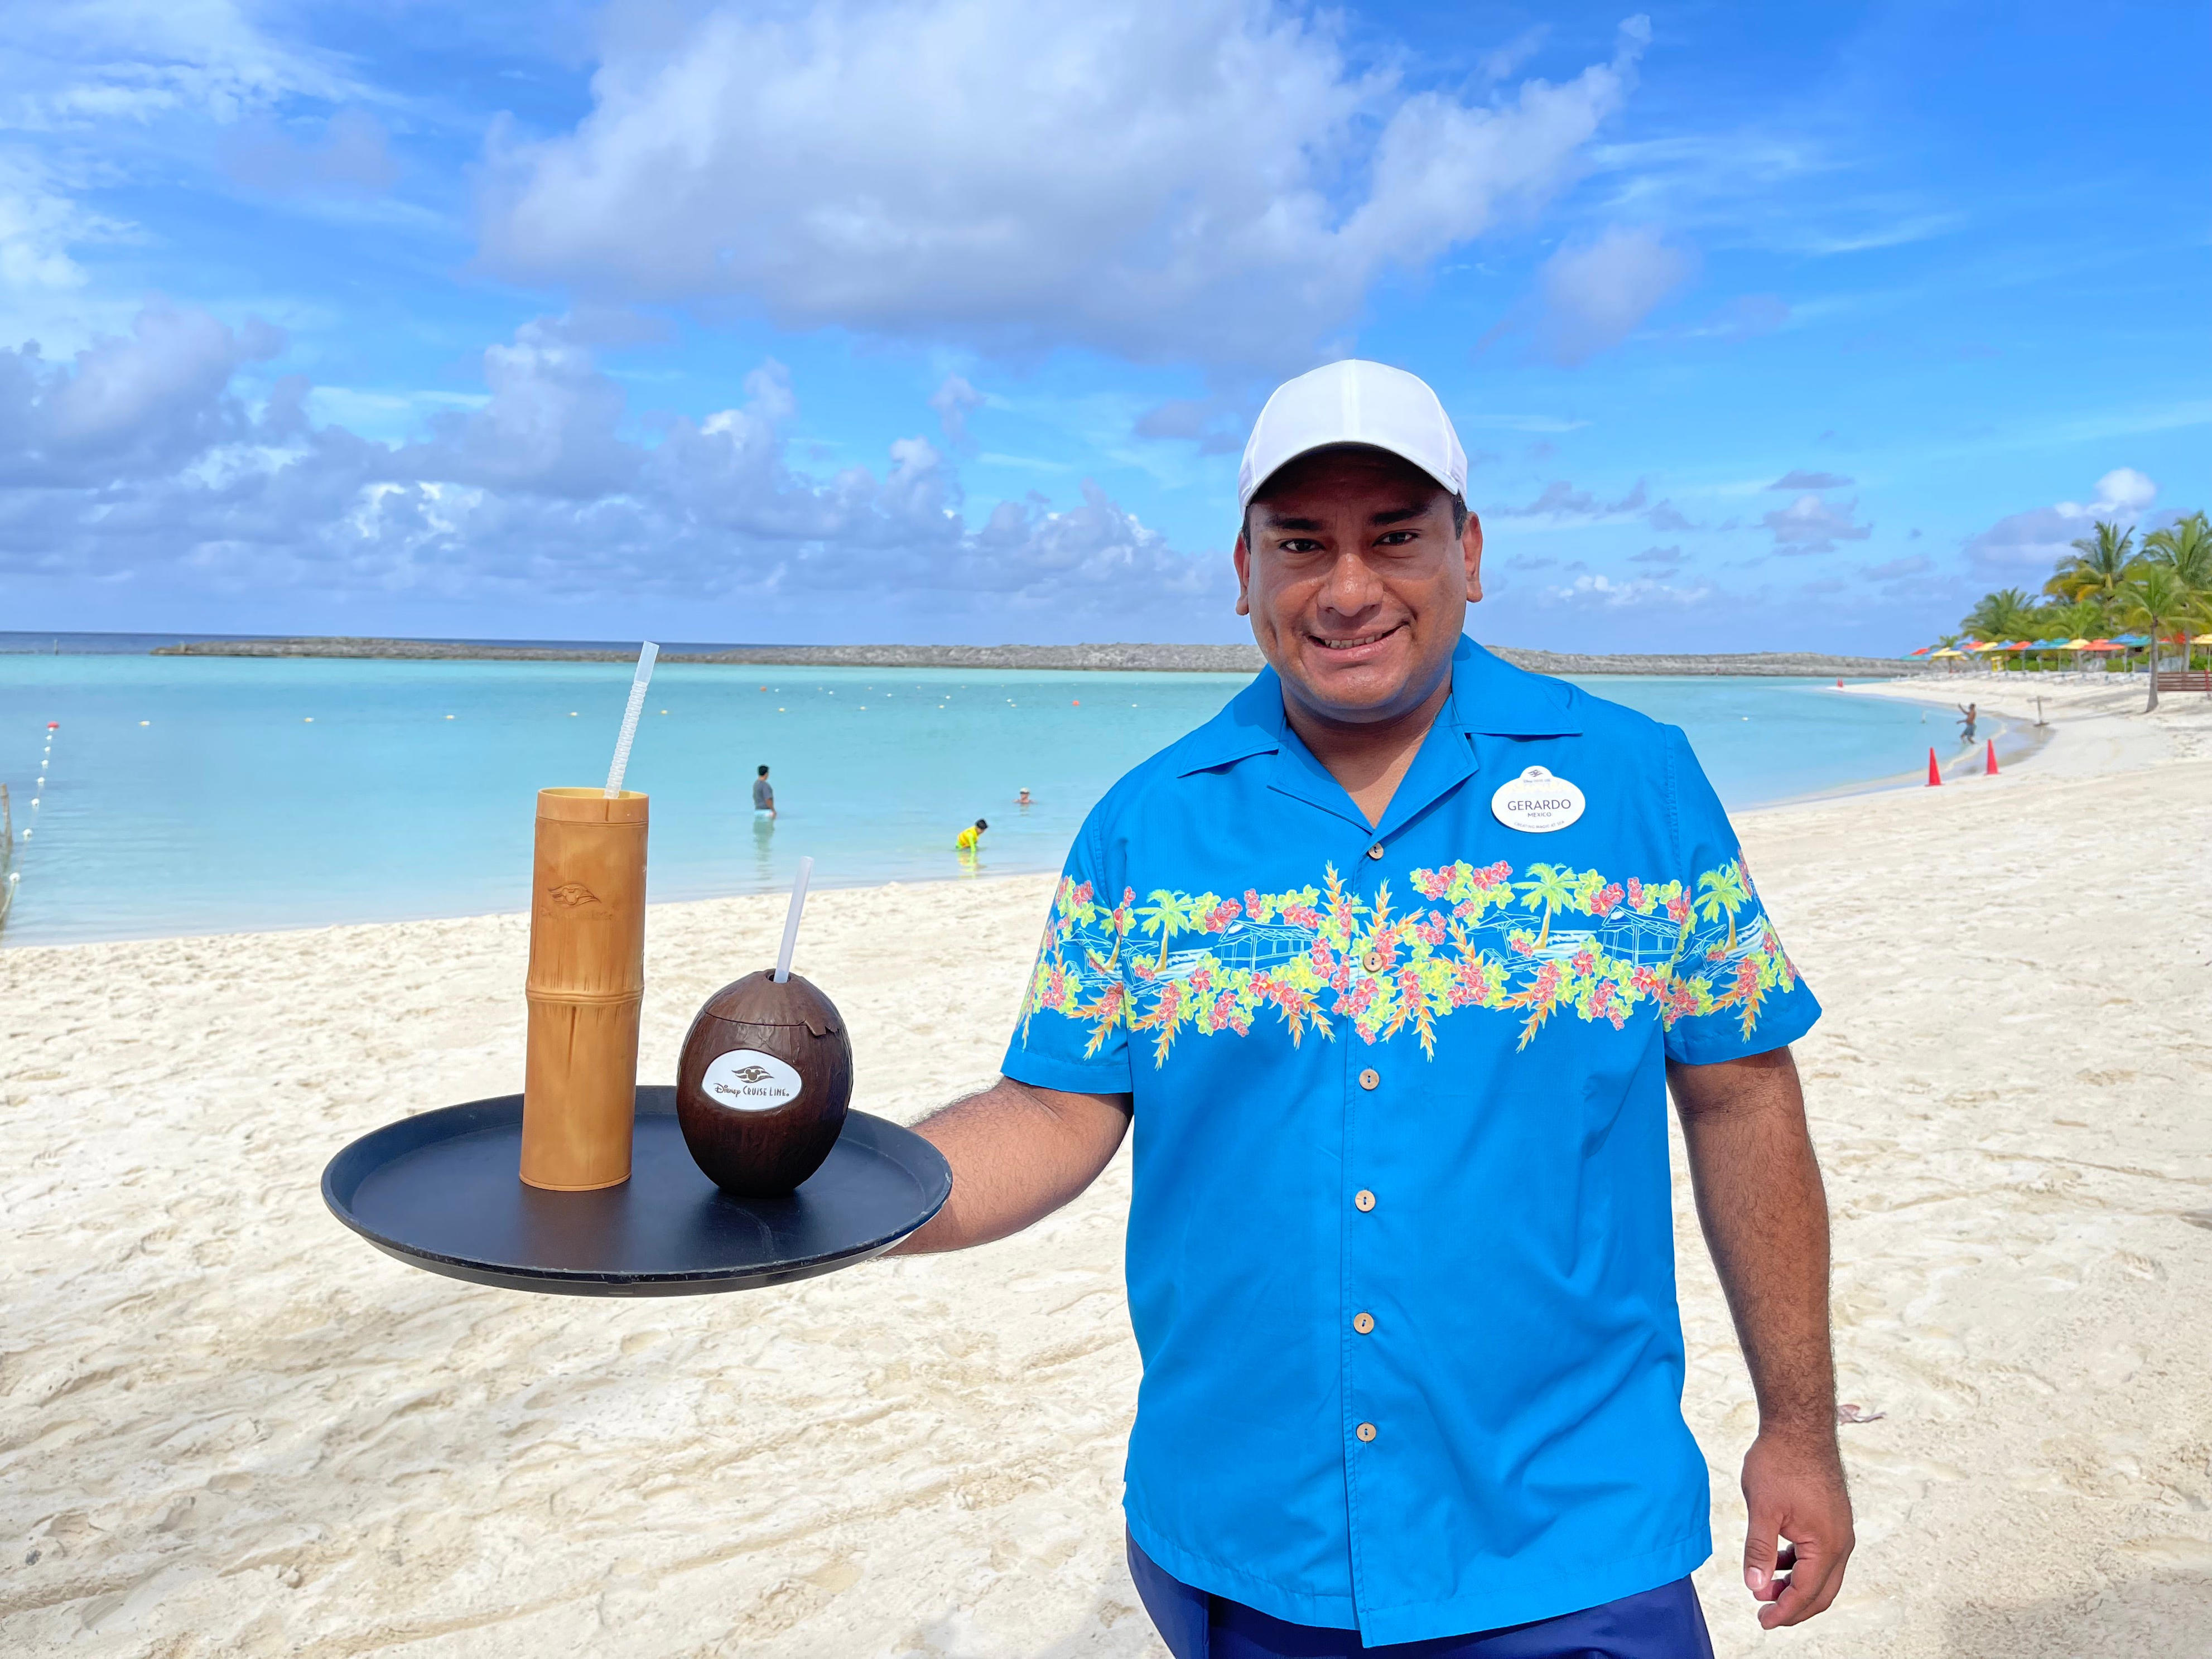 <p>I've been to several cruise-line private islands, but Disney's are by far my favorite. <a href="https://www.businessinsider.com/castaway-cay-disney-private-island-2018-9">Castaway Cay</a>, located in the Bahamas, exudes relaxation. The island is home to one of my favorite activities, the Castaway 5k, which is included in the cruise fare and allows participants to earn an exclusive race medal.</p><p>Disney's newest island destination, Lookout Cay at Lighthouse Point, is located near the southern tip of Eleuthera in The Bahamas. The beaches here blew me away and were some of the best I've experienced after dozens of trips to the Caribbean and Mexico.</p>